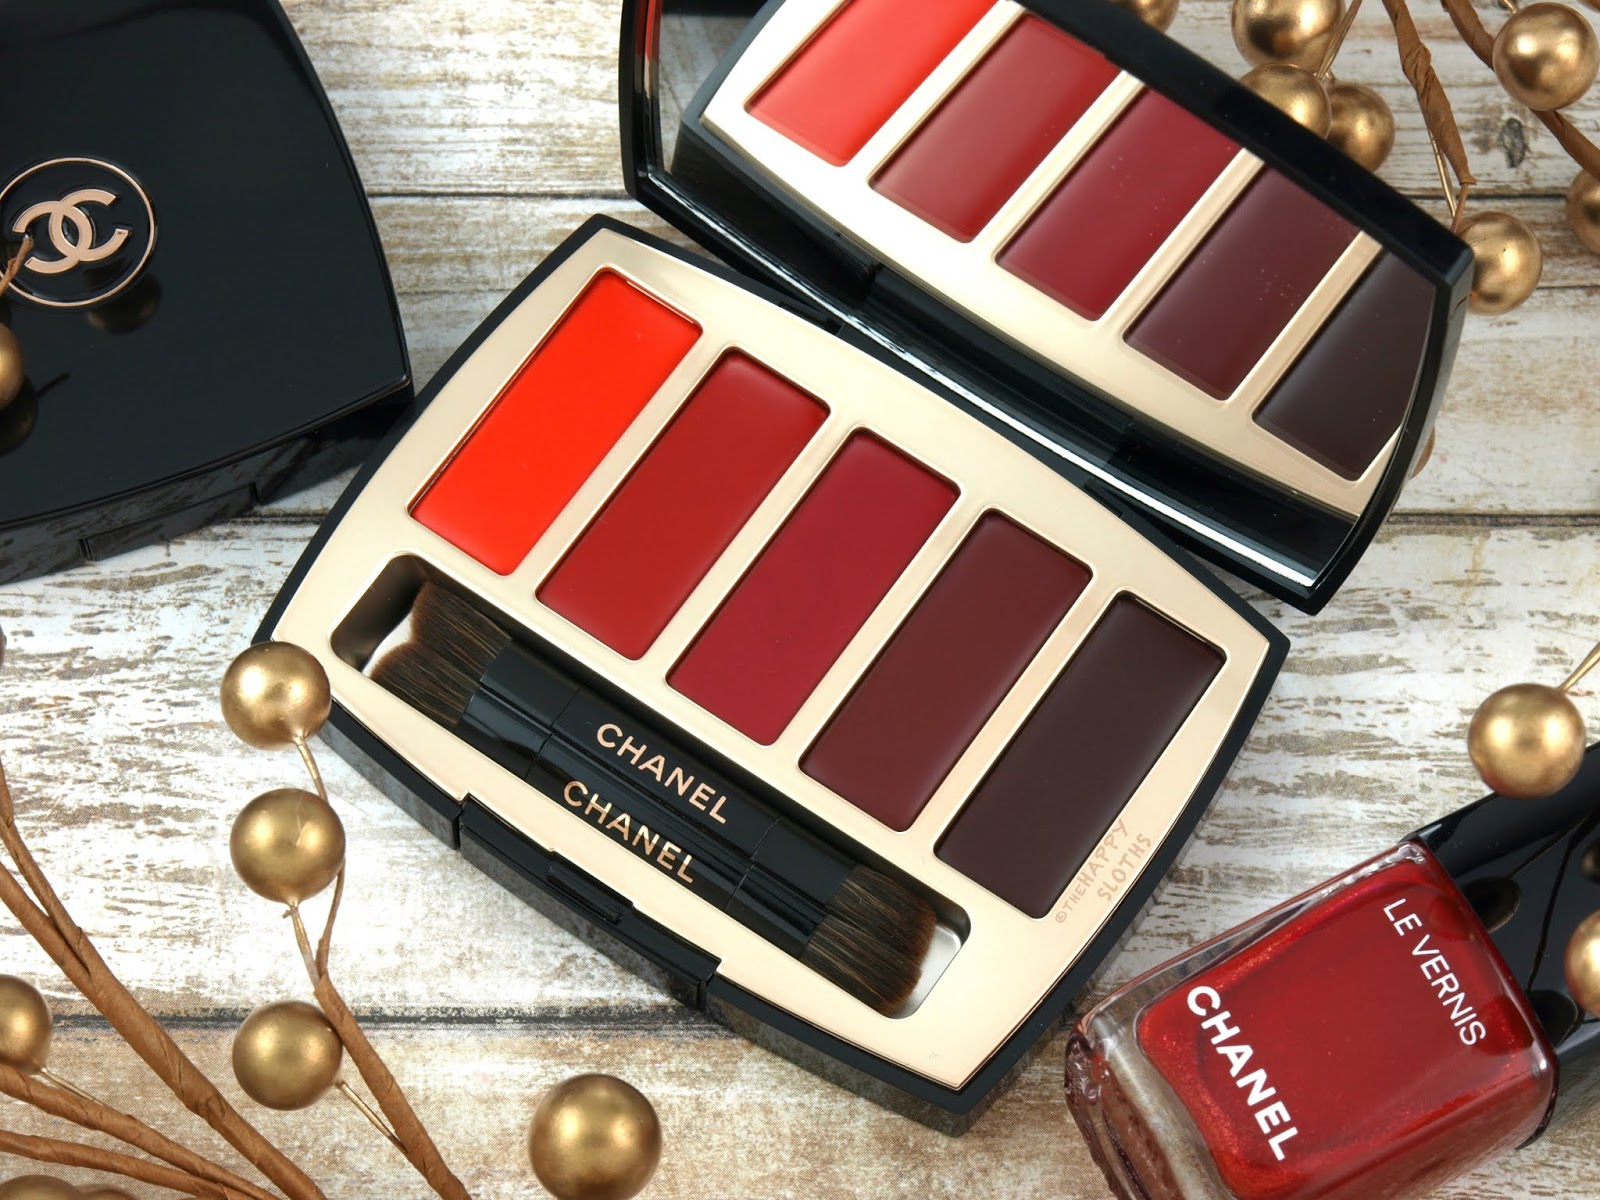 Chanel | Holiday 2018 La Palette Caractere Lipstick Collection: Review and Swatches